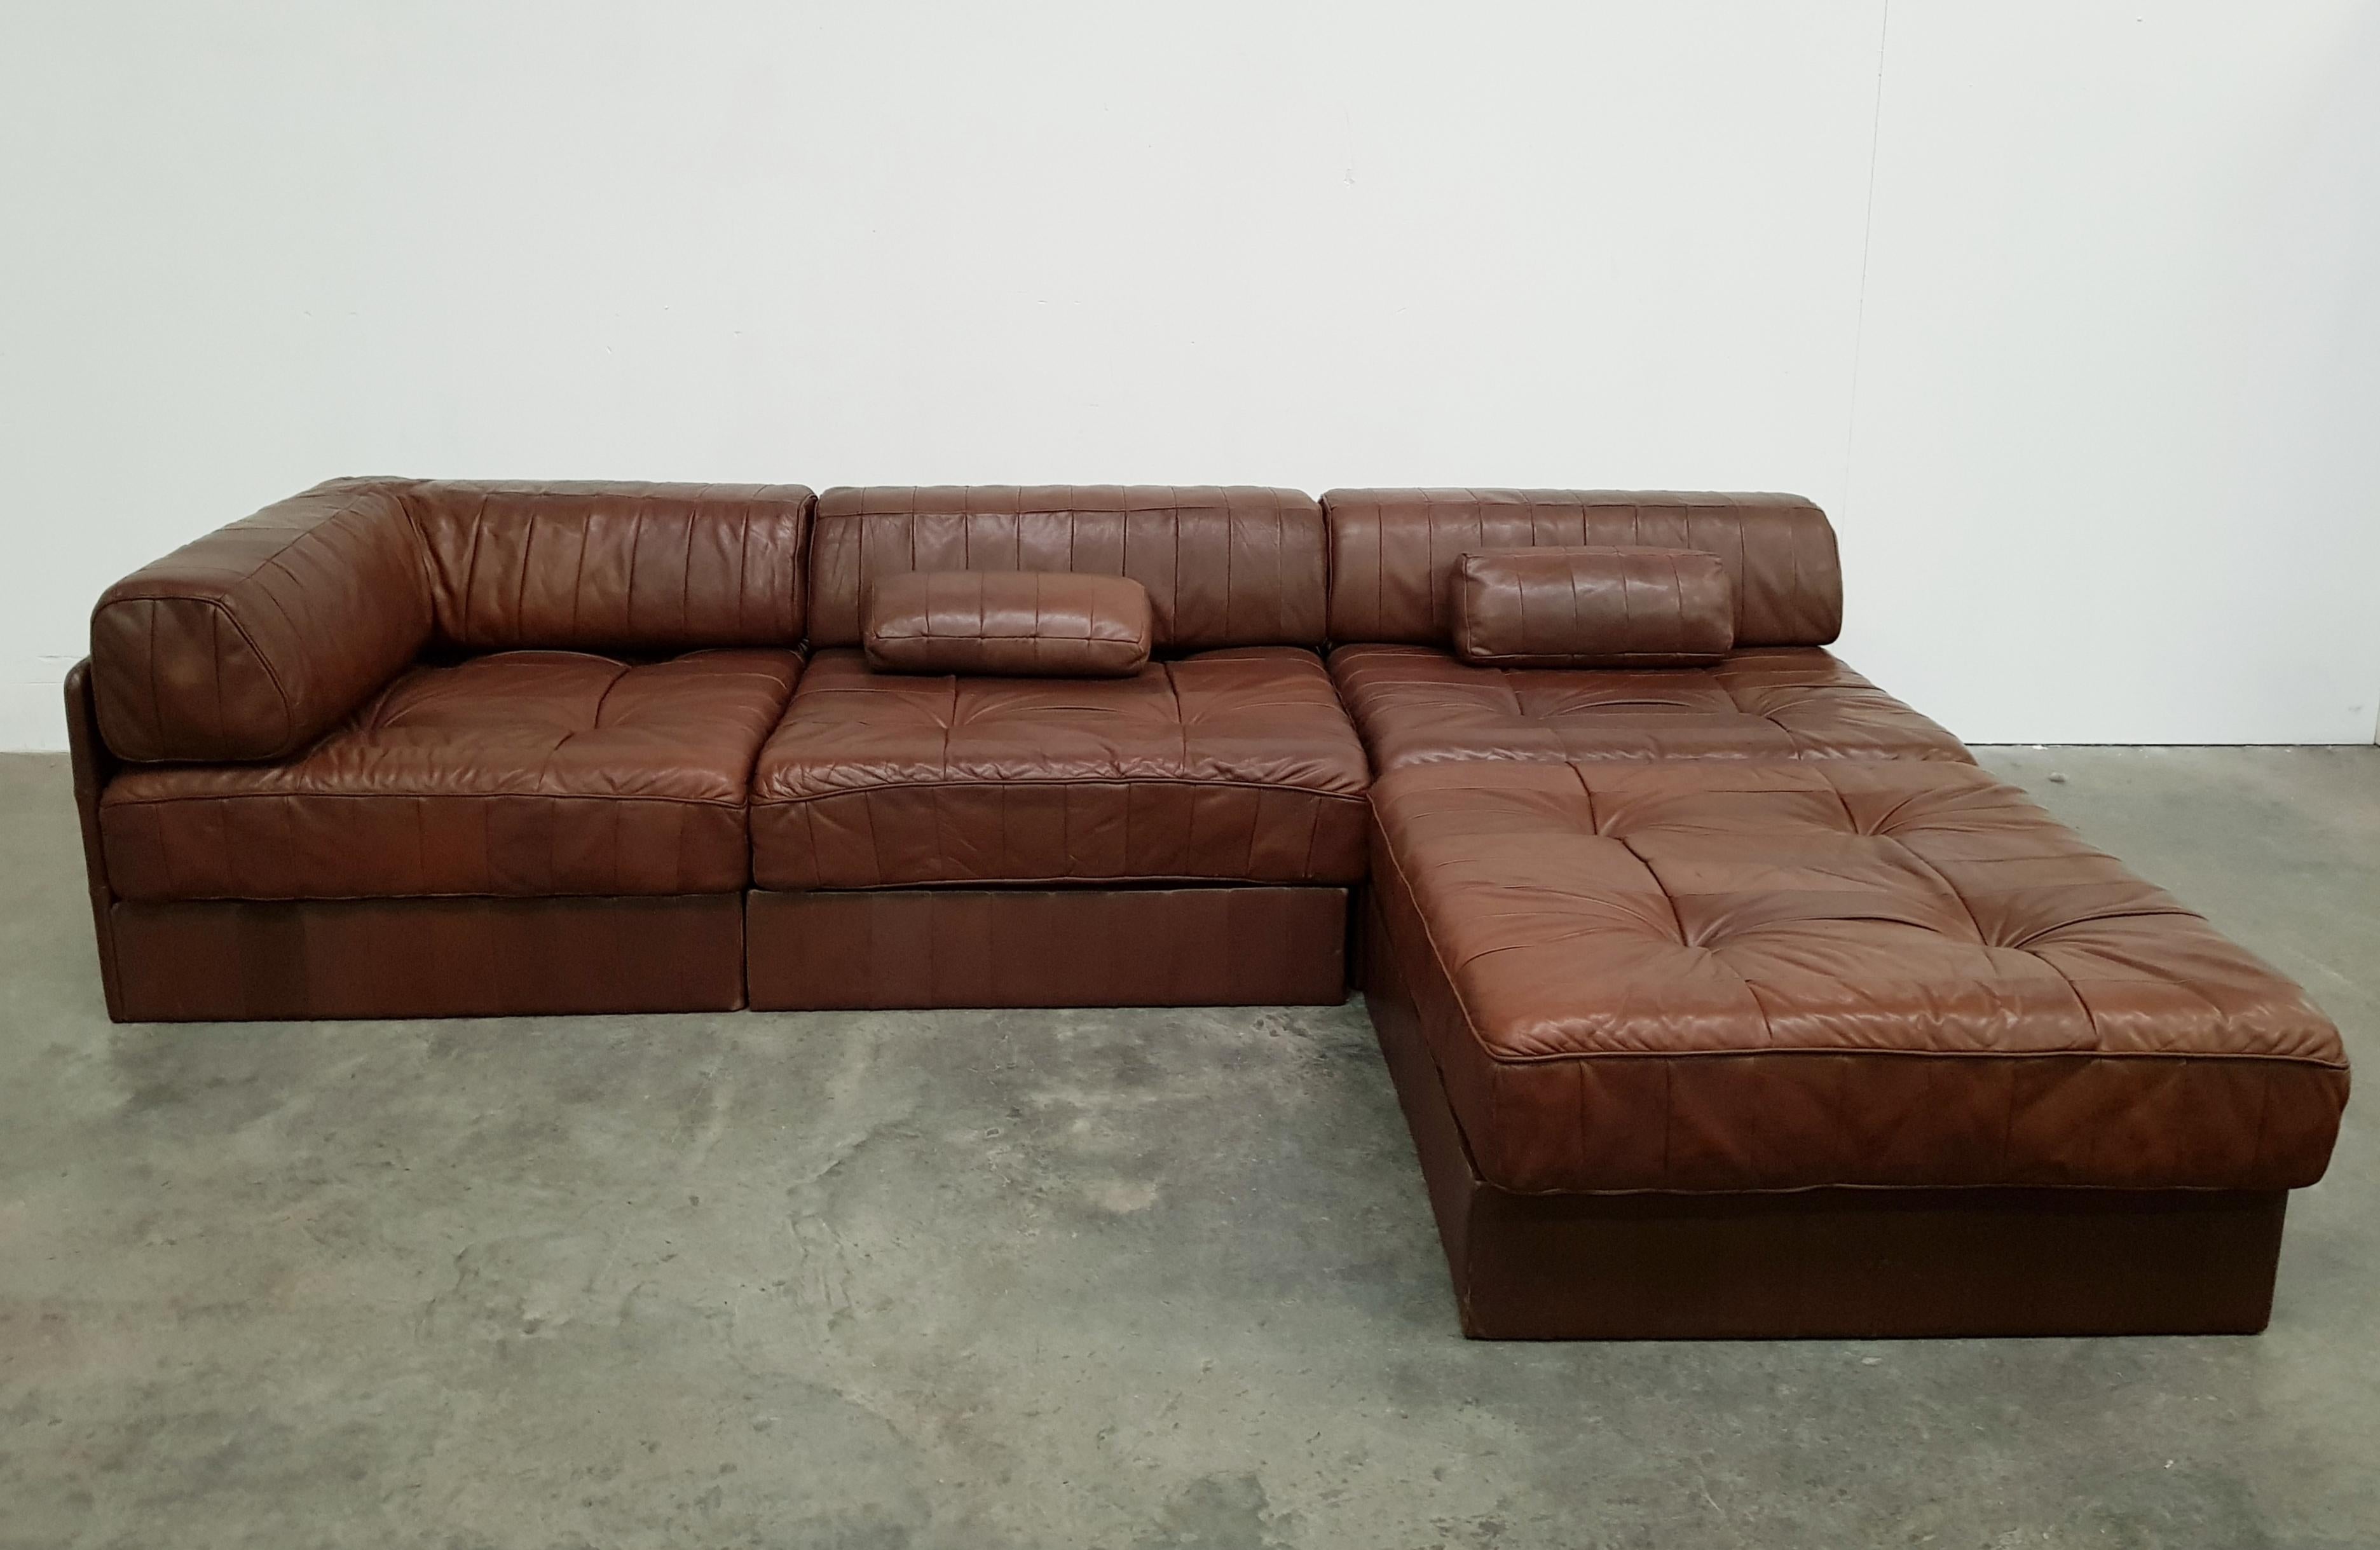 20th Century Sectional Patchwork Couch by De Sede Switzerland